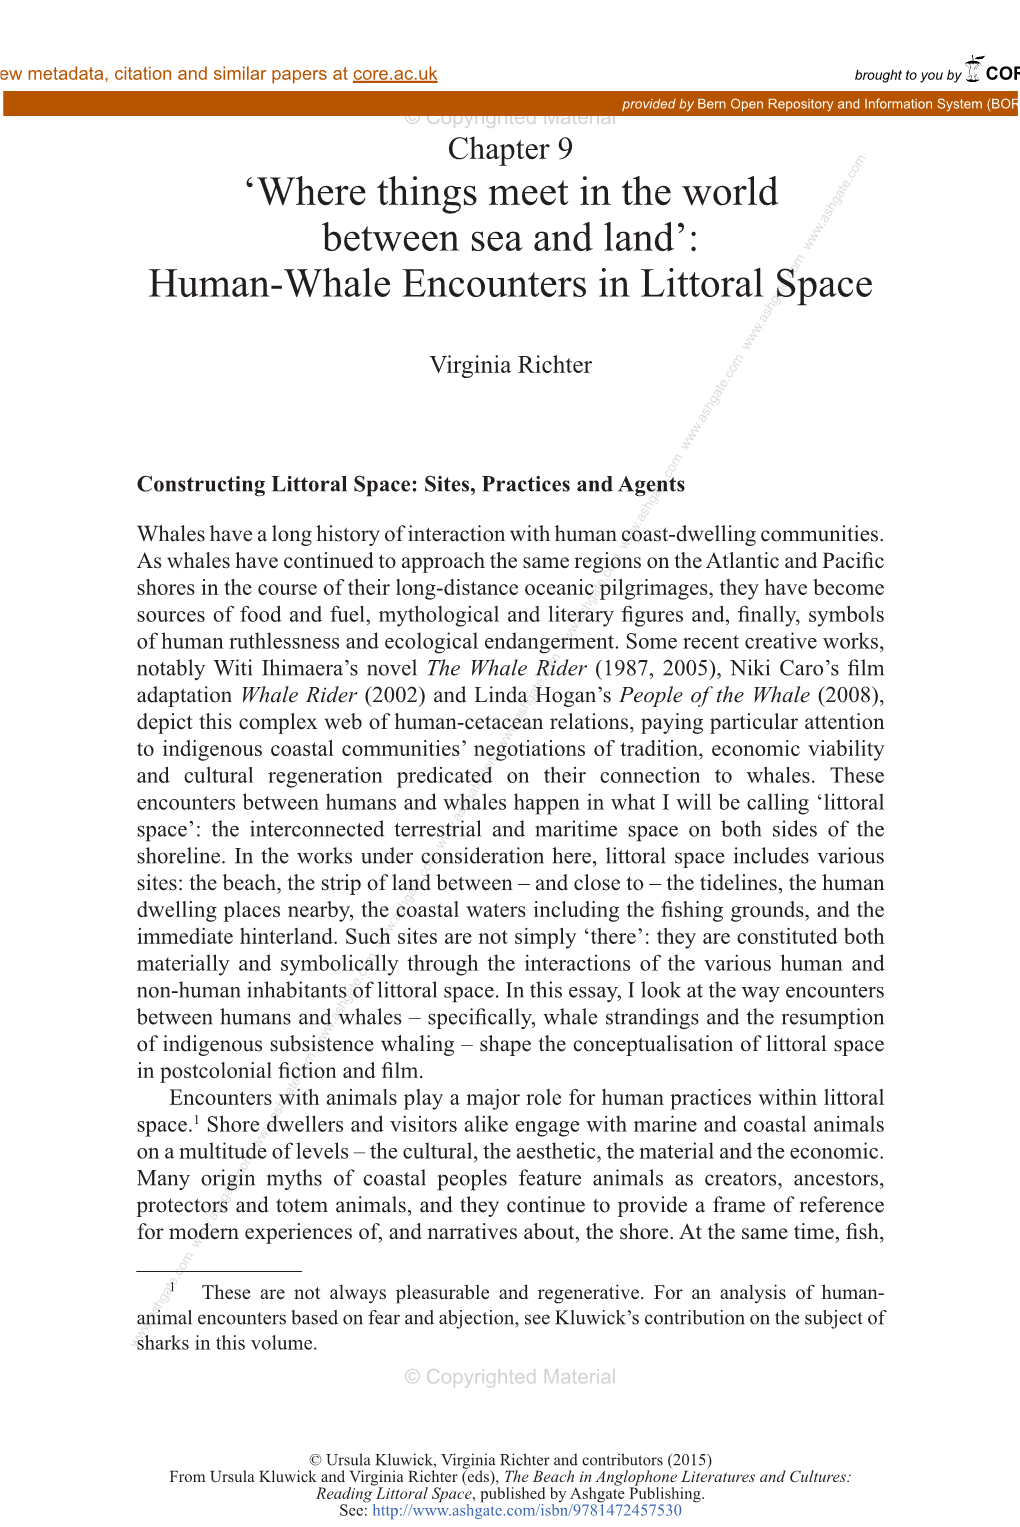 Human-Whale Encounters in Littoral Space